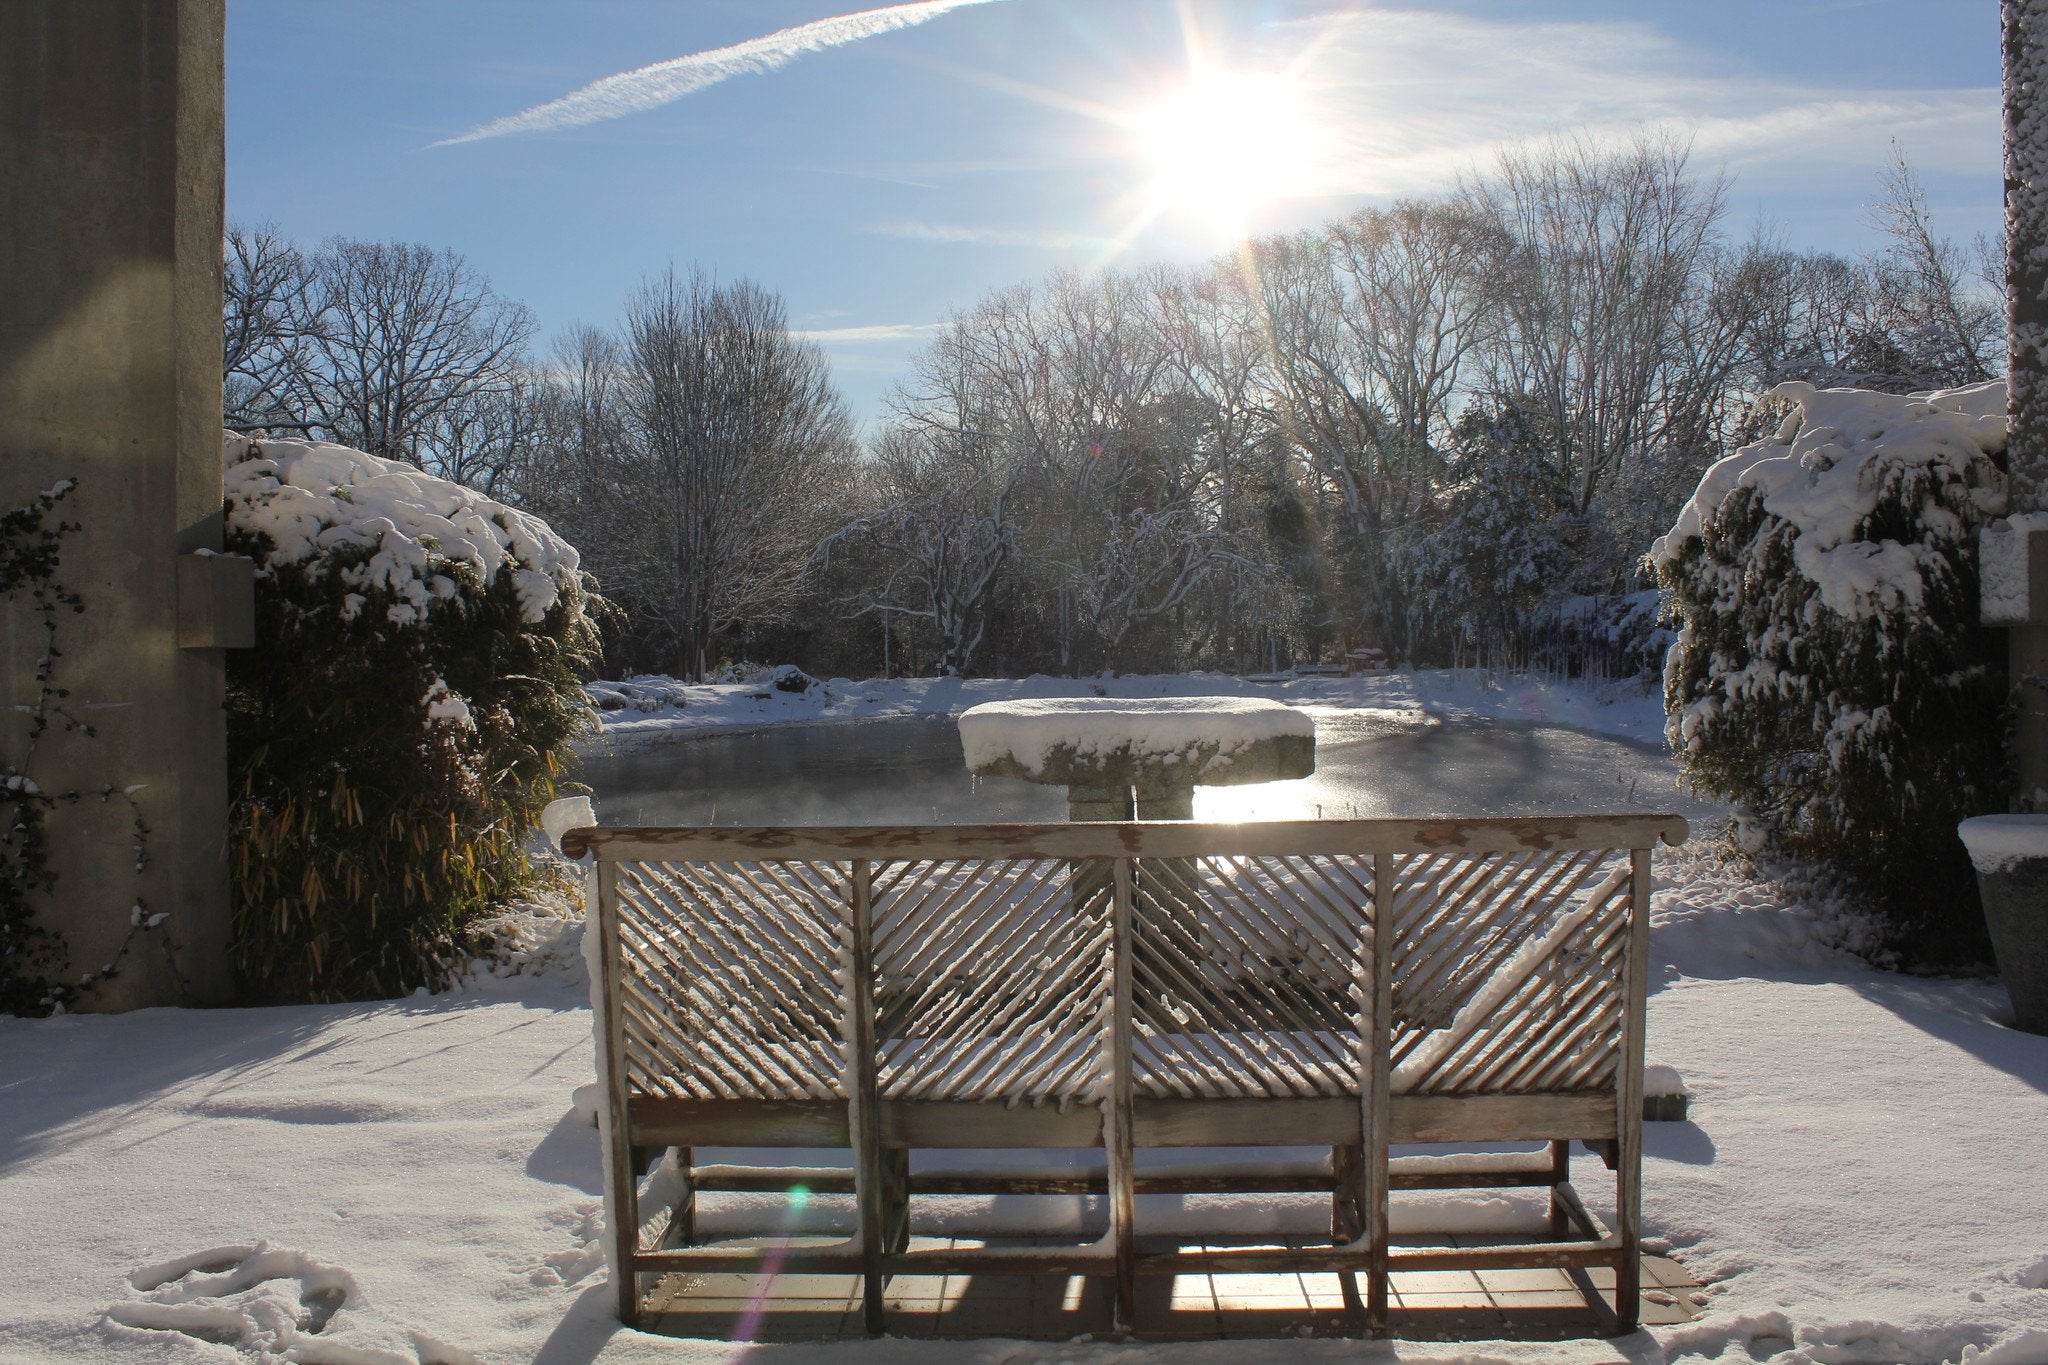 The Year in Review - Winter at LongHouse